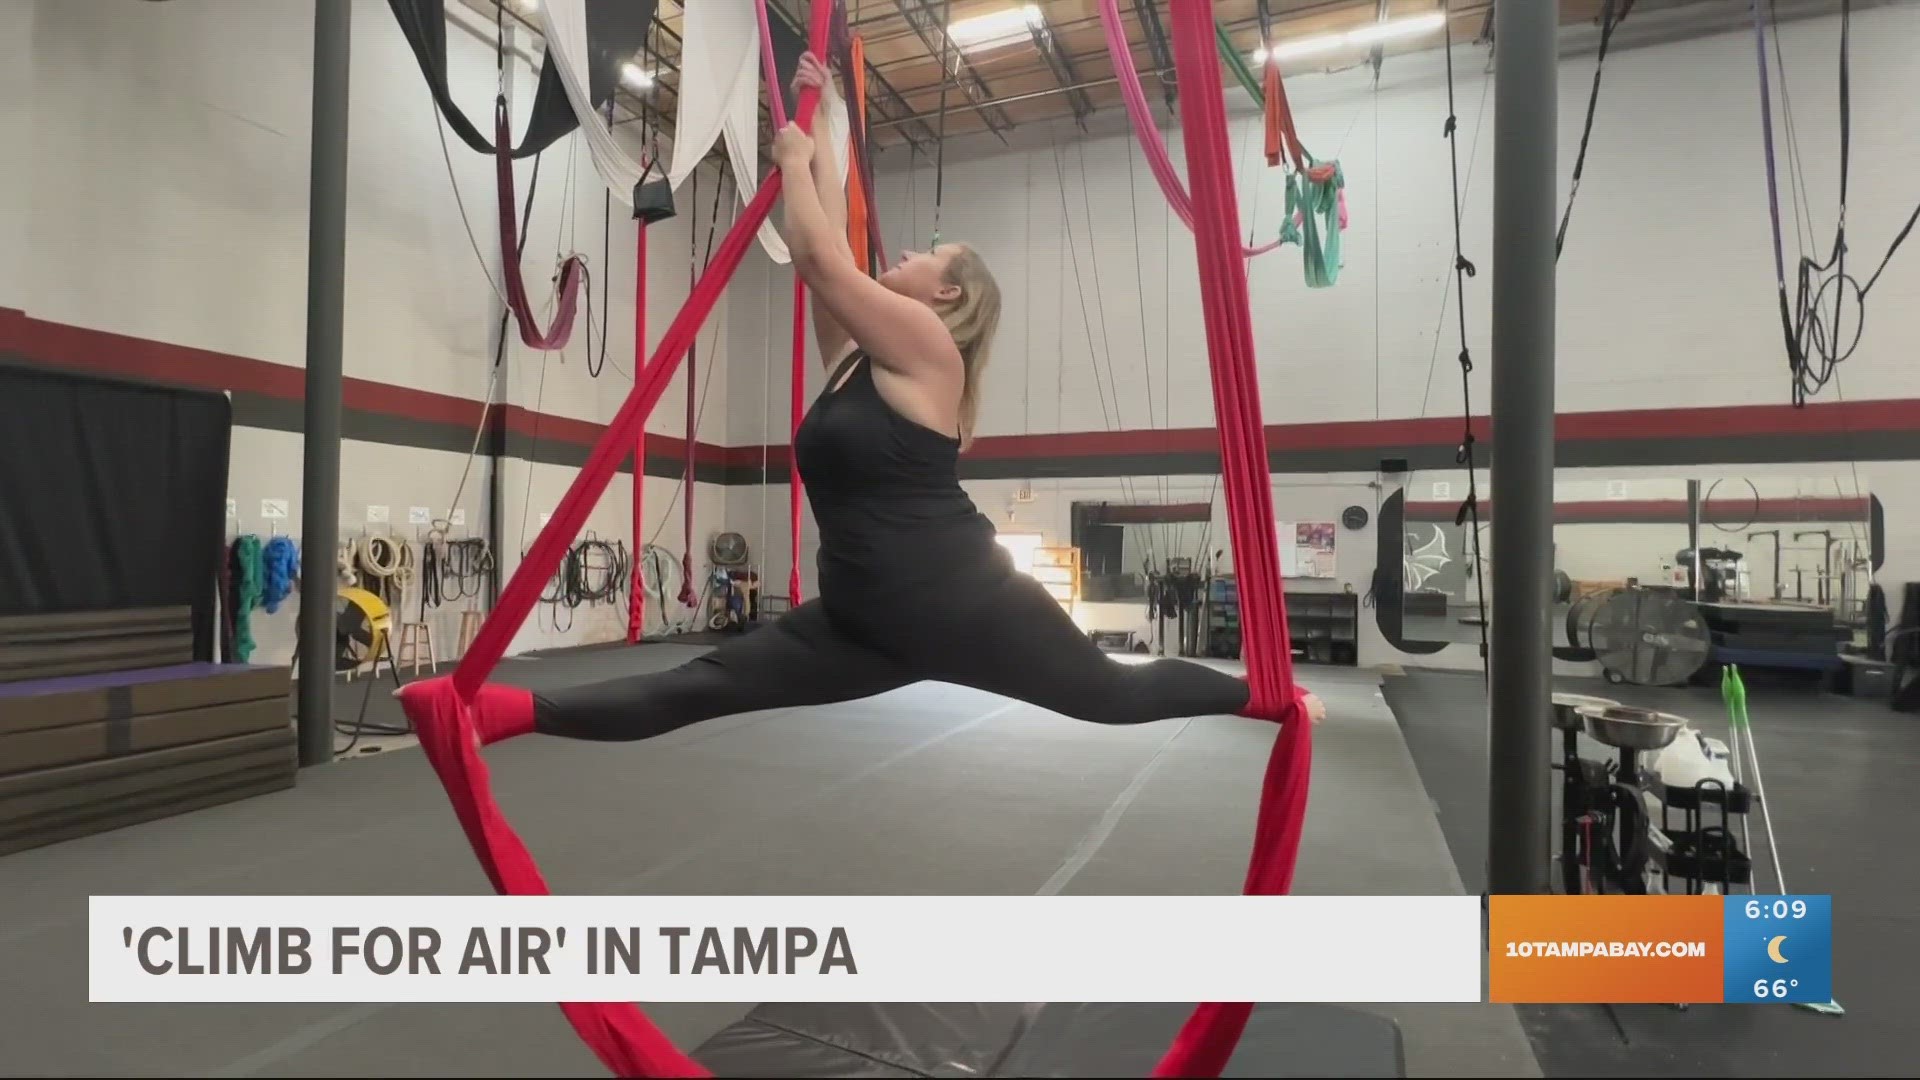 The annual Fight For Air Climb in Tampa is coming up on April 1.